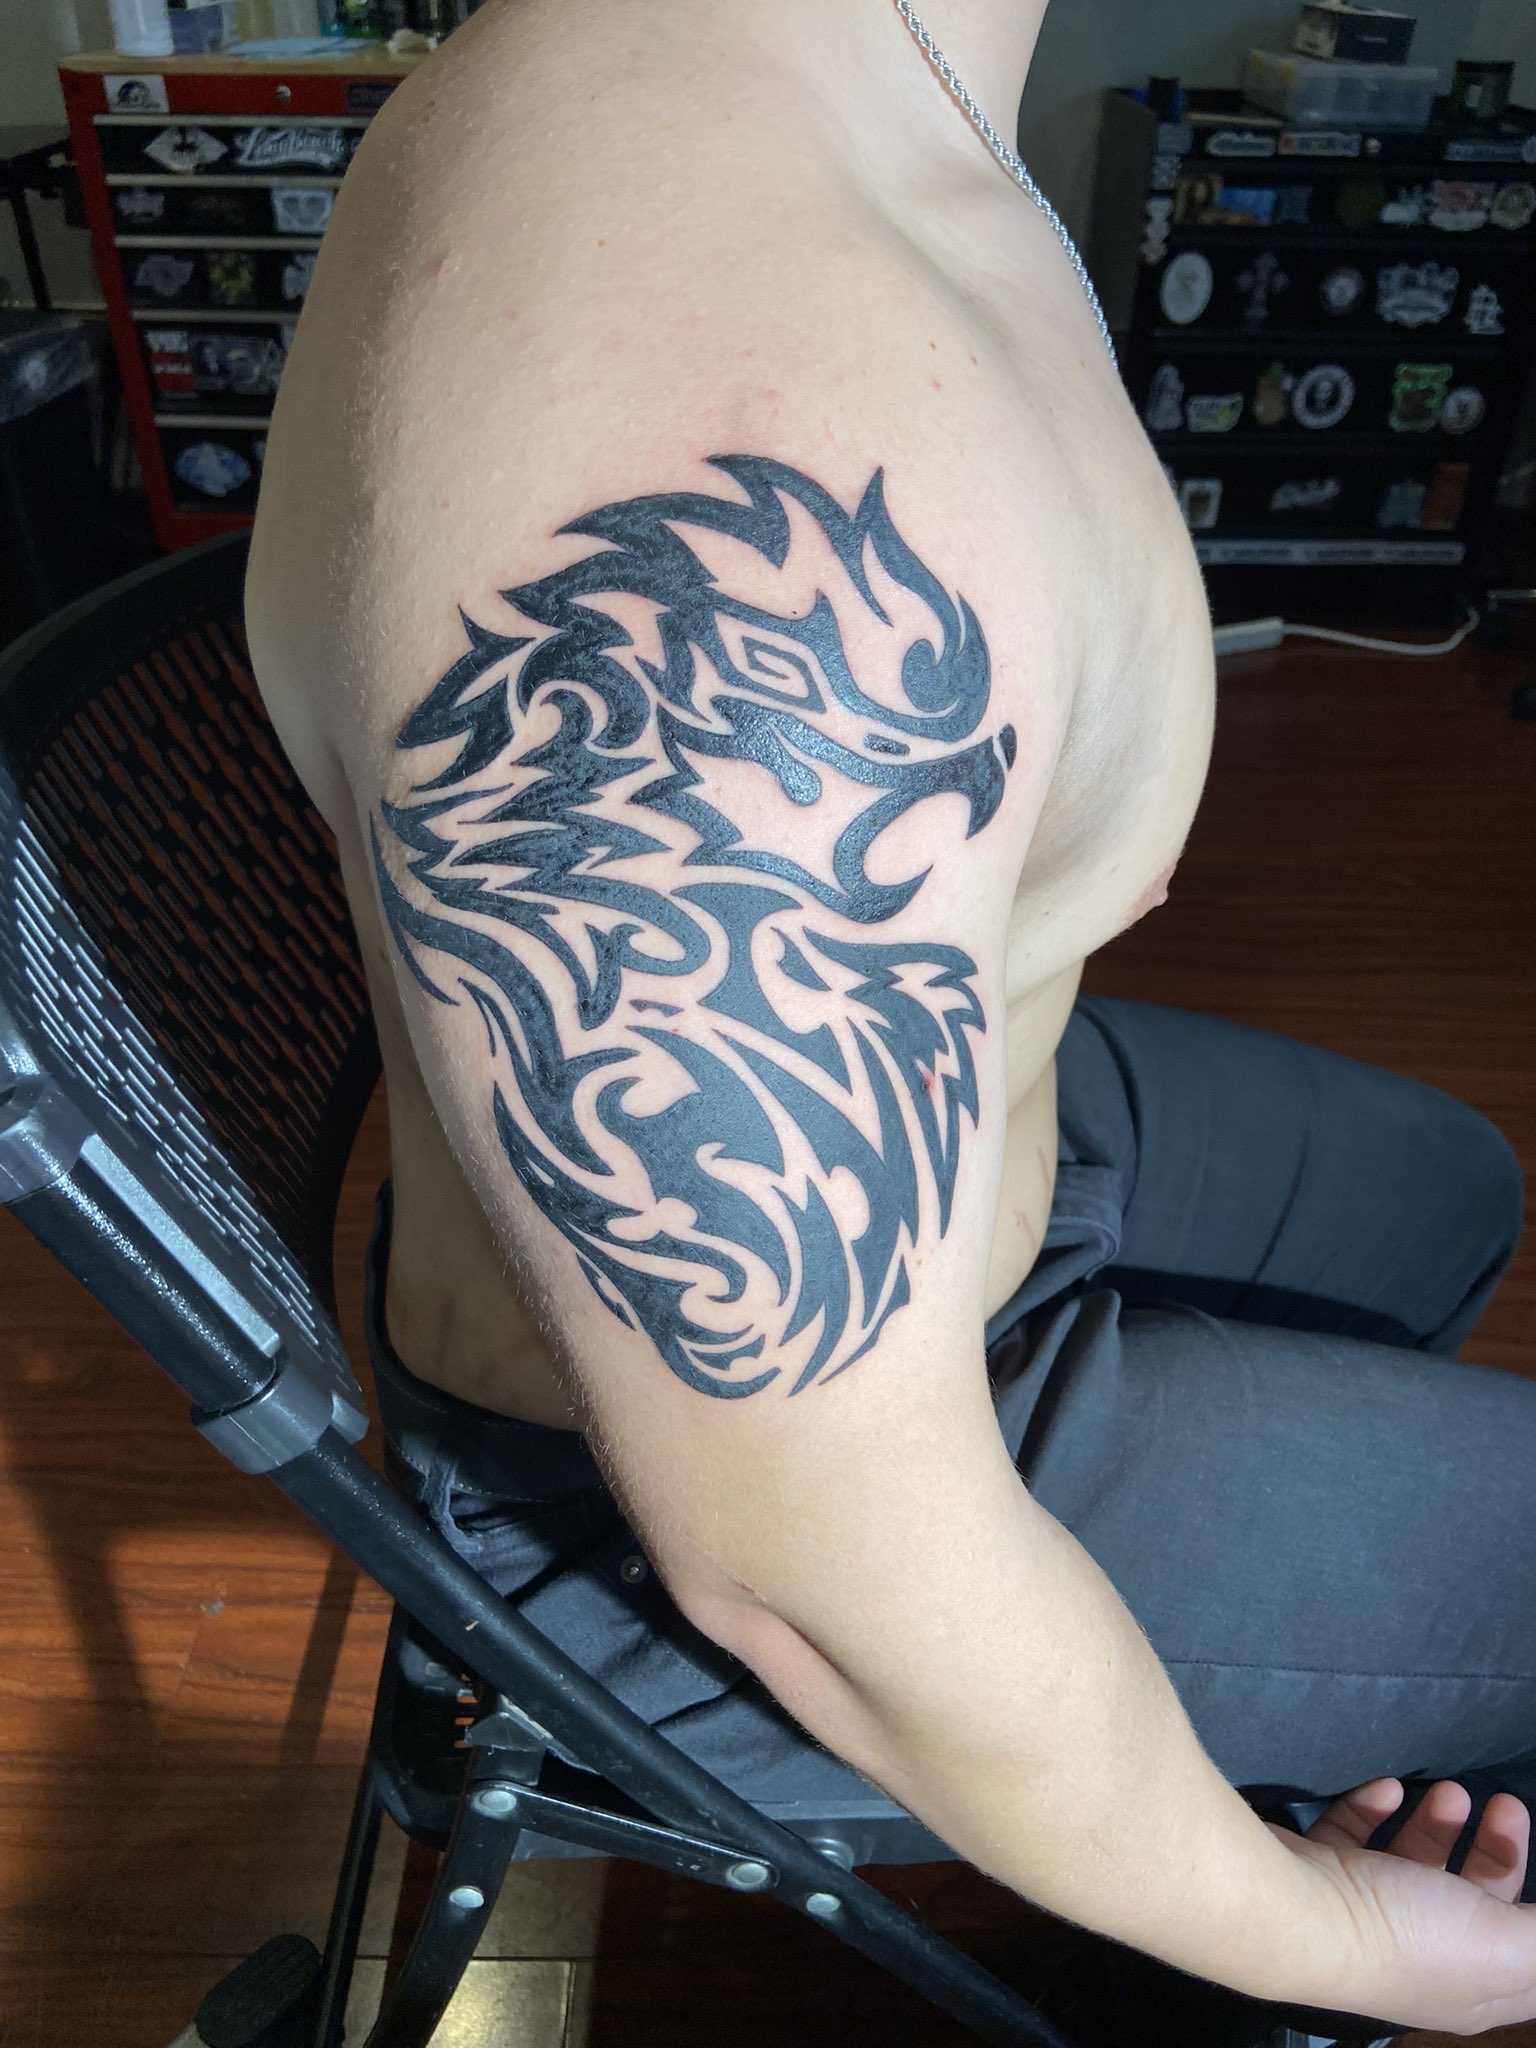 ShinyCollector (LJ) on X: "It took a whole damn day, but I now have an Arcanine tattoo https://t.co/NPnyeVyVWb" / X